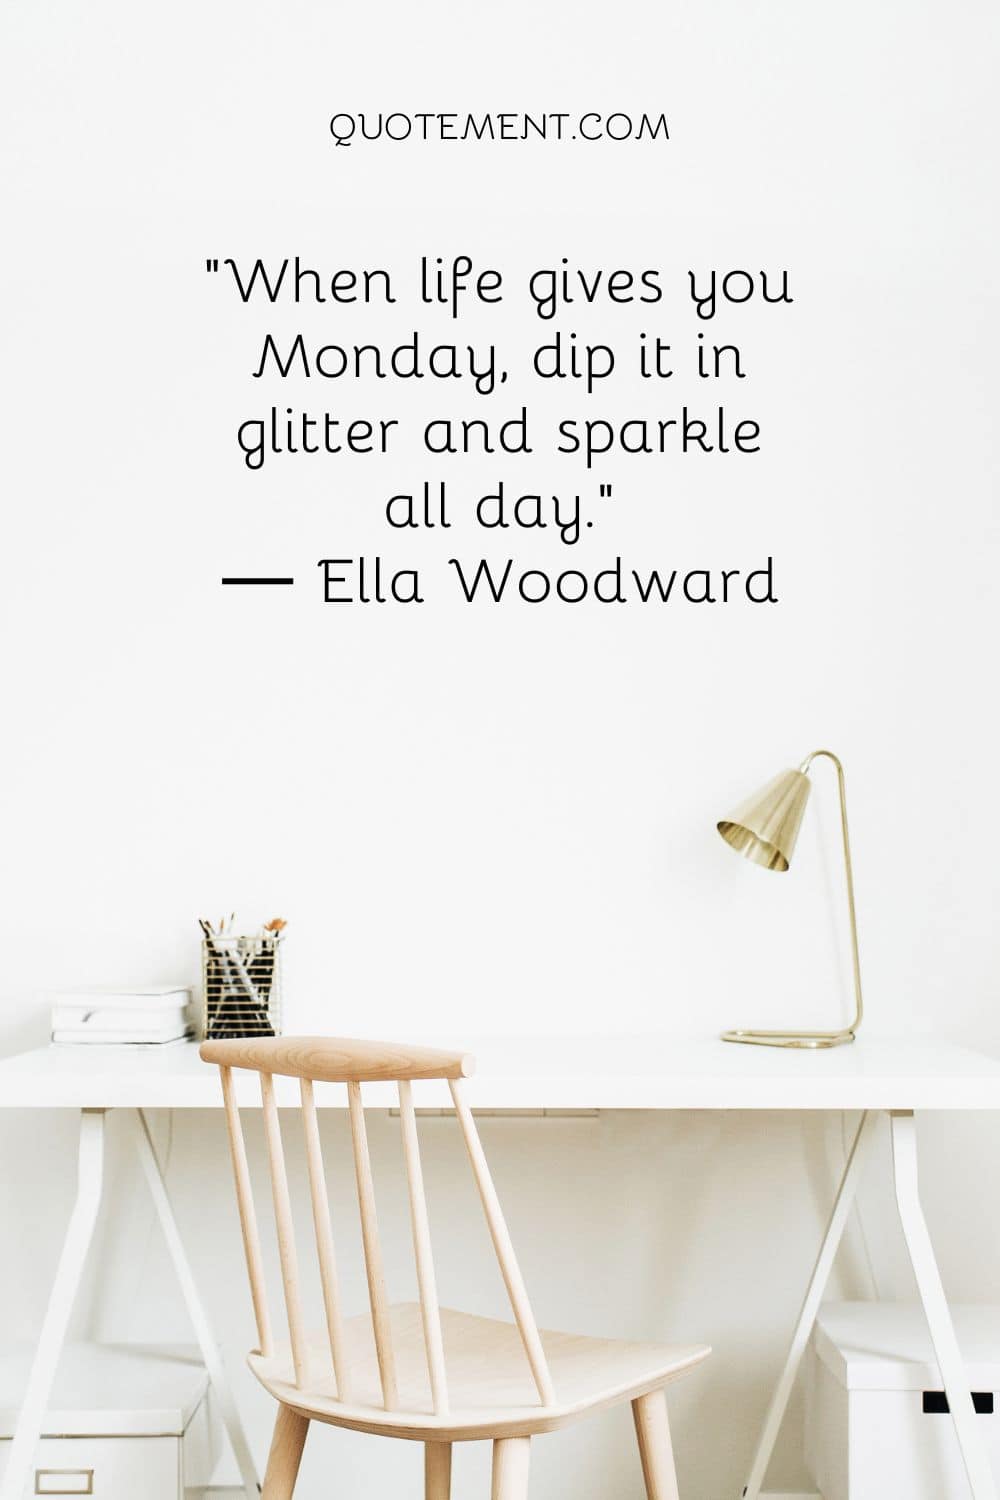 When life gives you Monday, dip it in glitter and sparkle all day